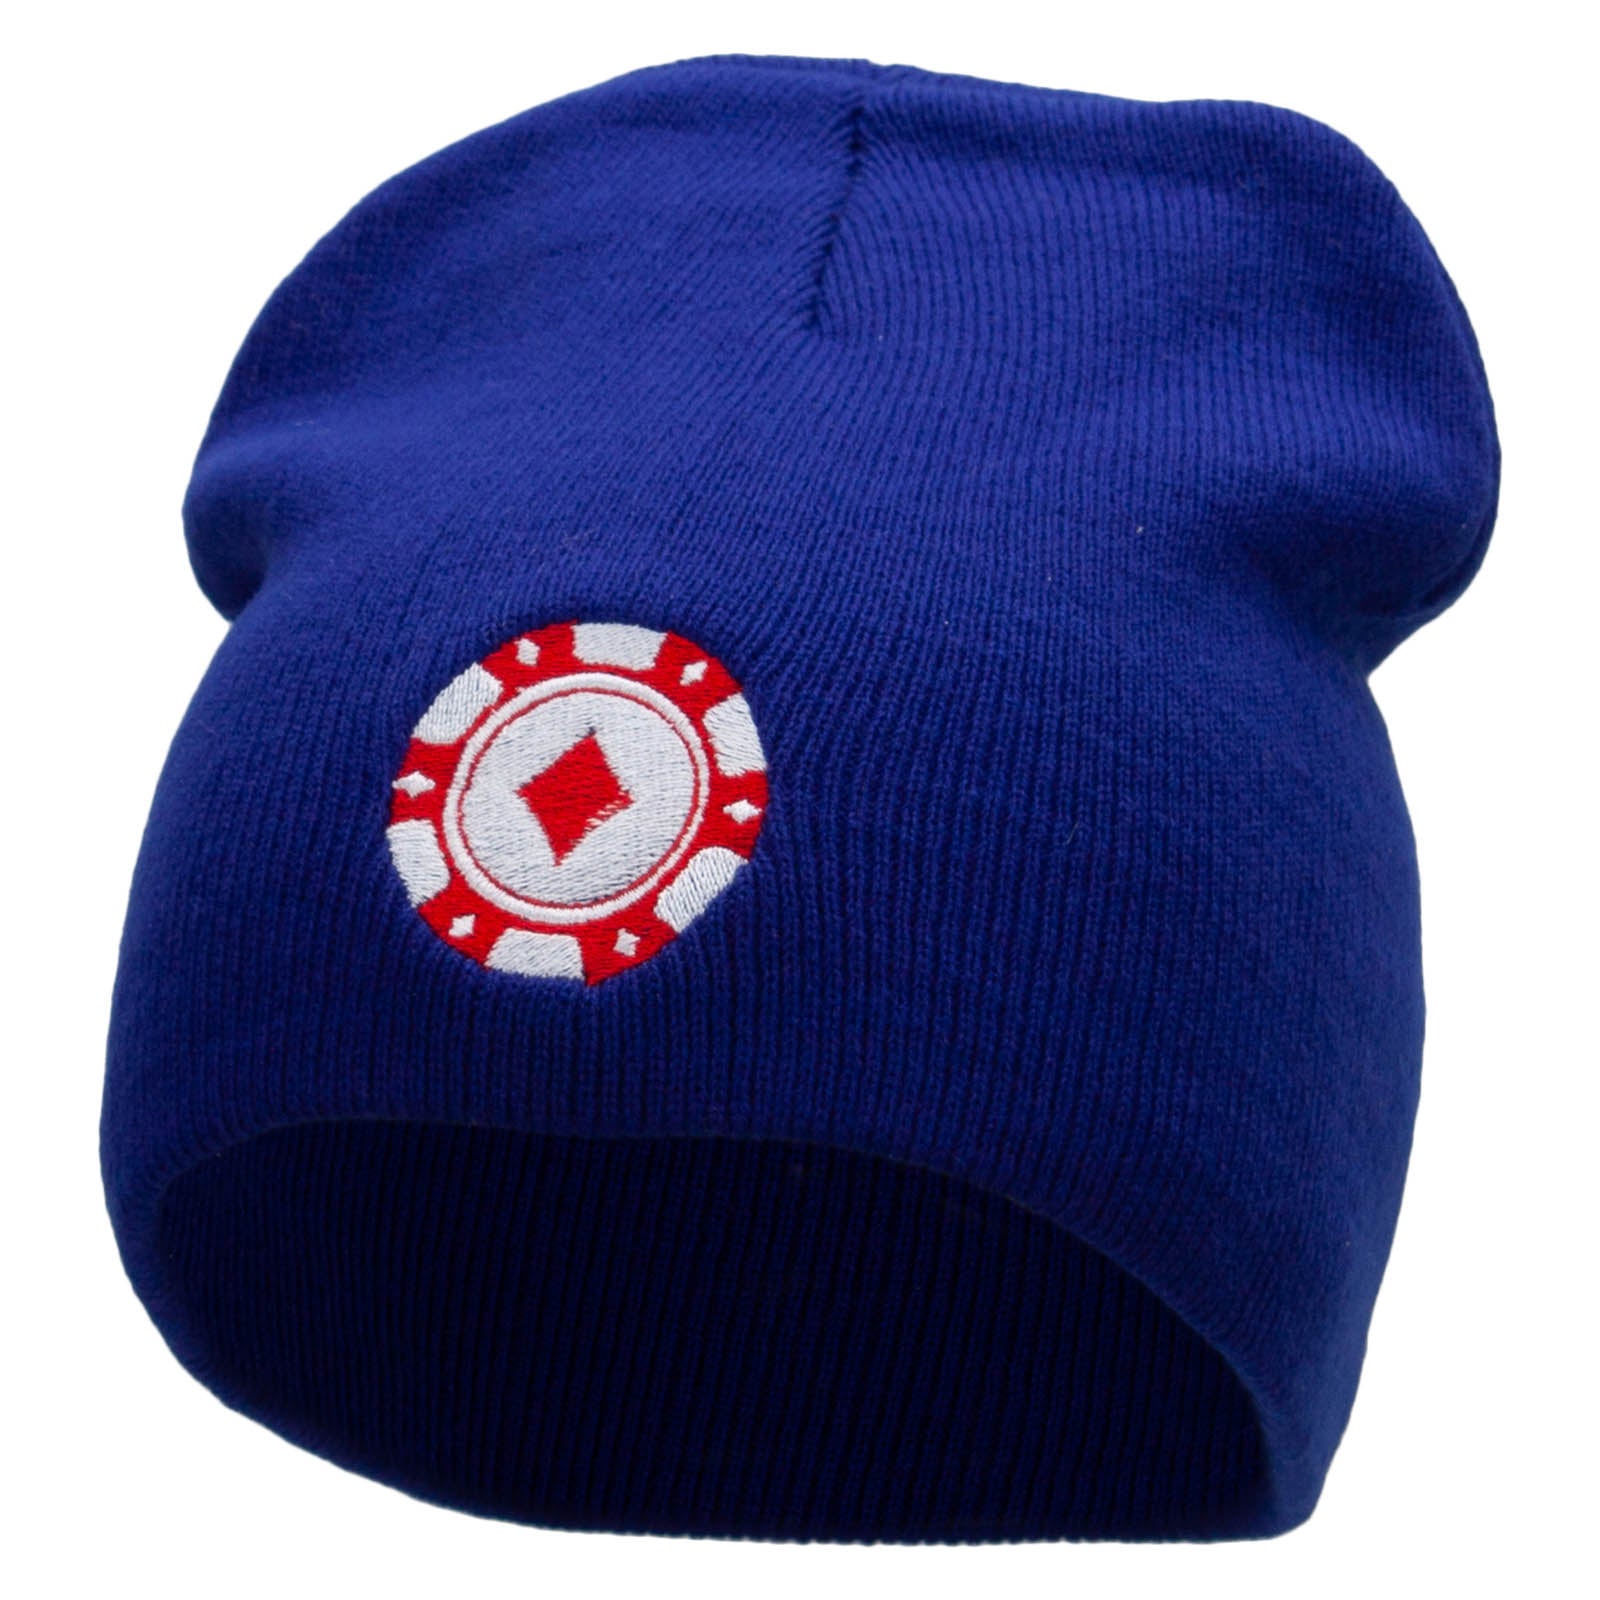 Poker Chip Embroidered 8 Inch Short Beanie - Royal OSFM